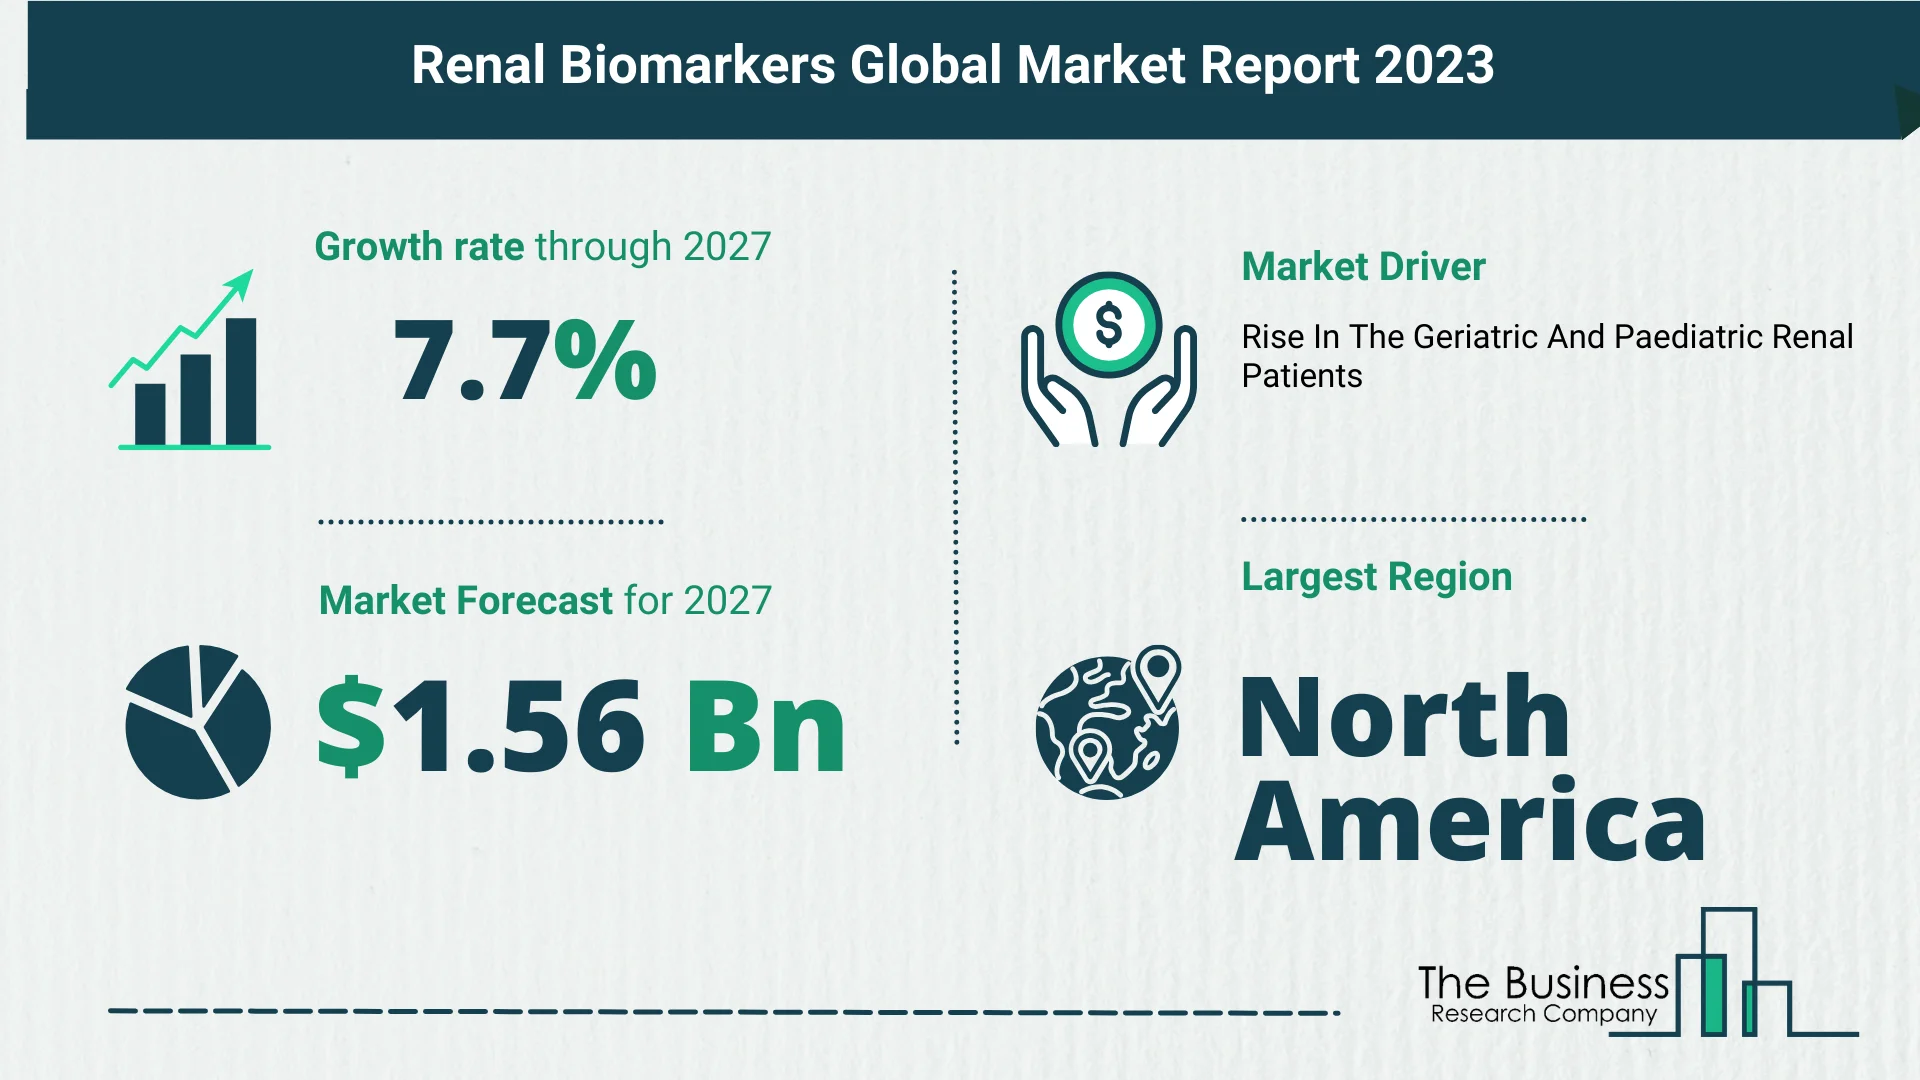 Key Trends And Drivers In The Renal Biomarkers Market 2023